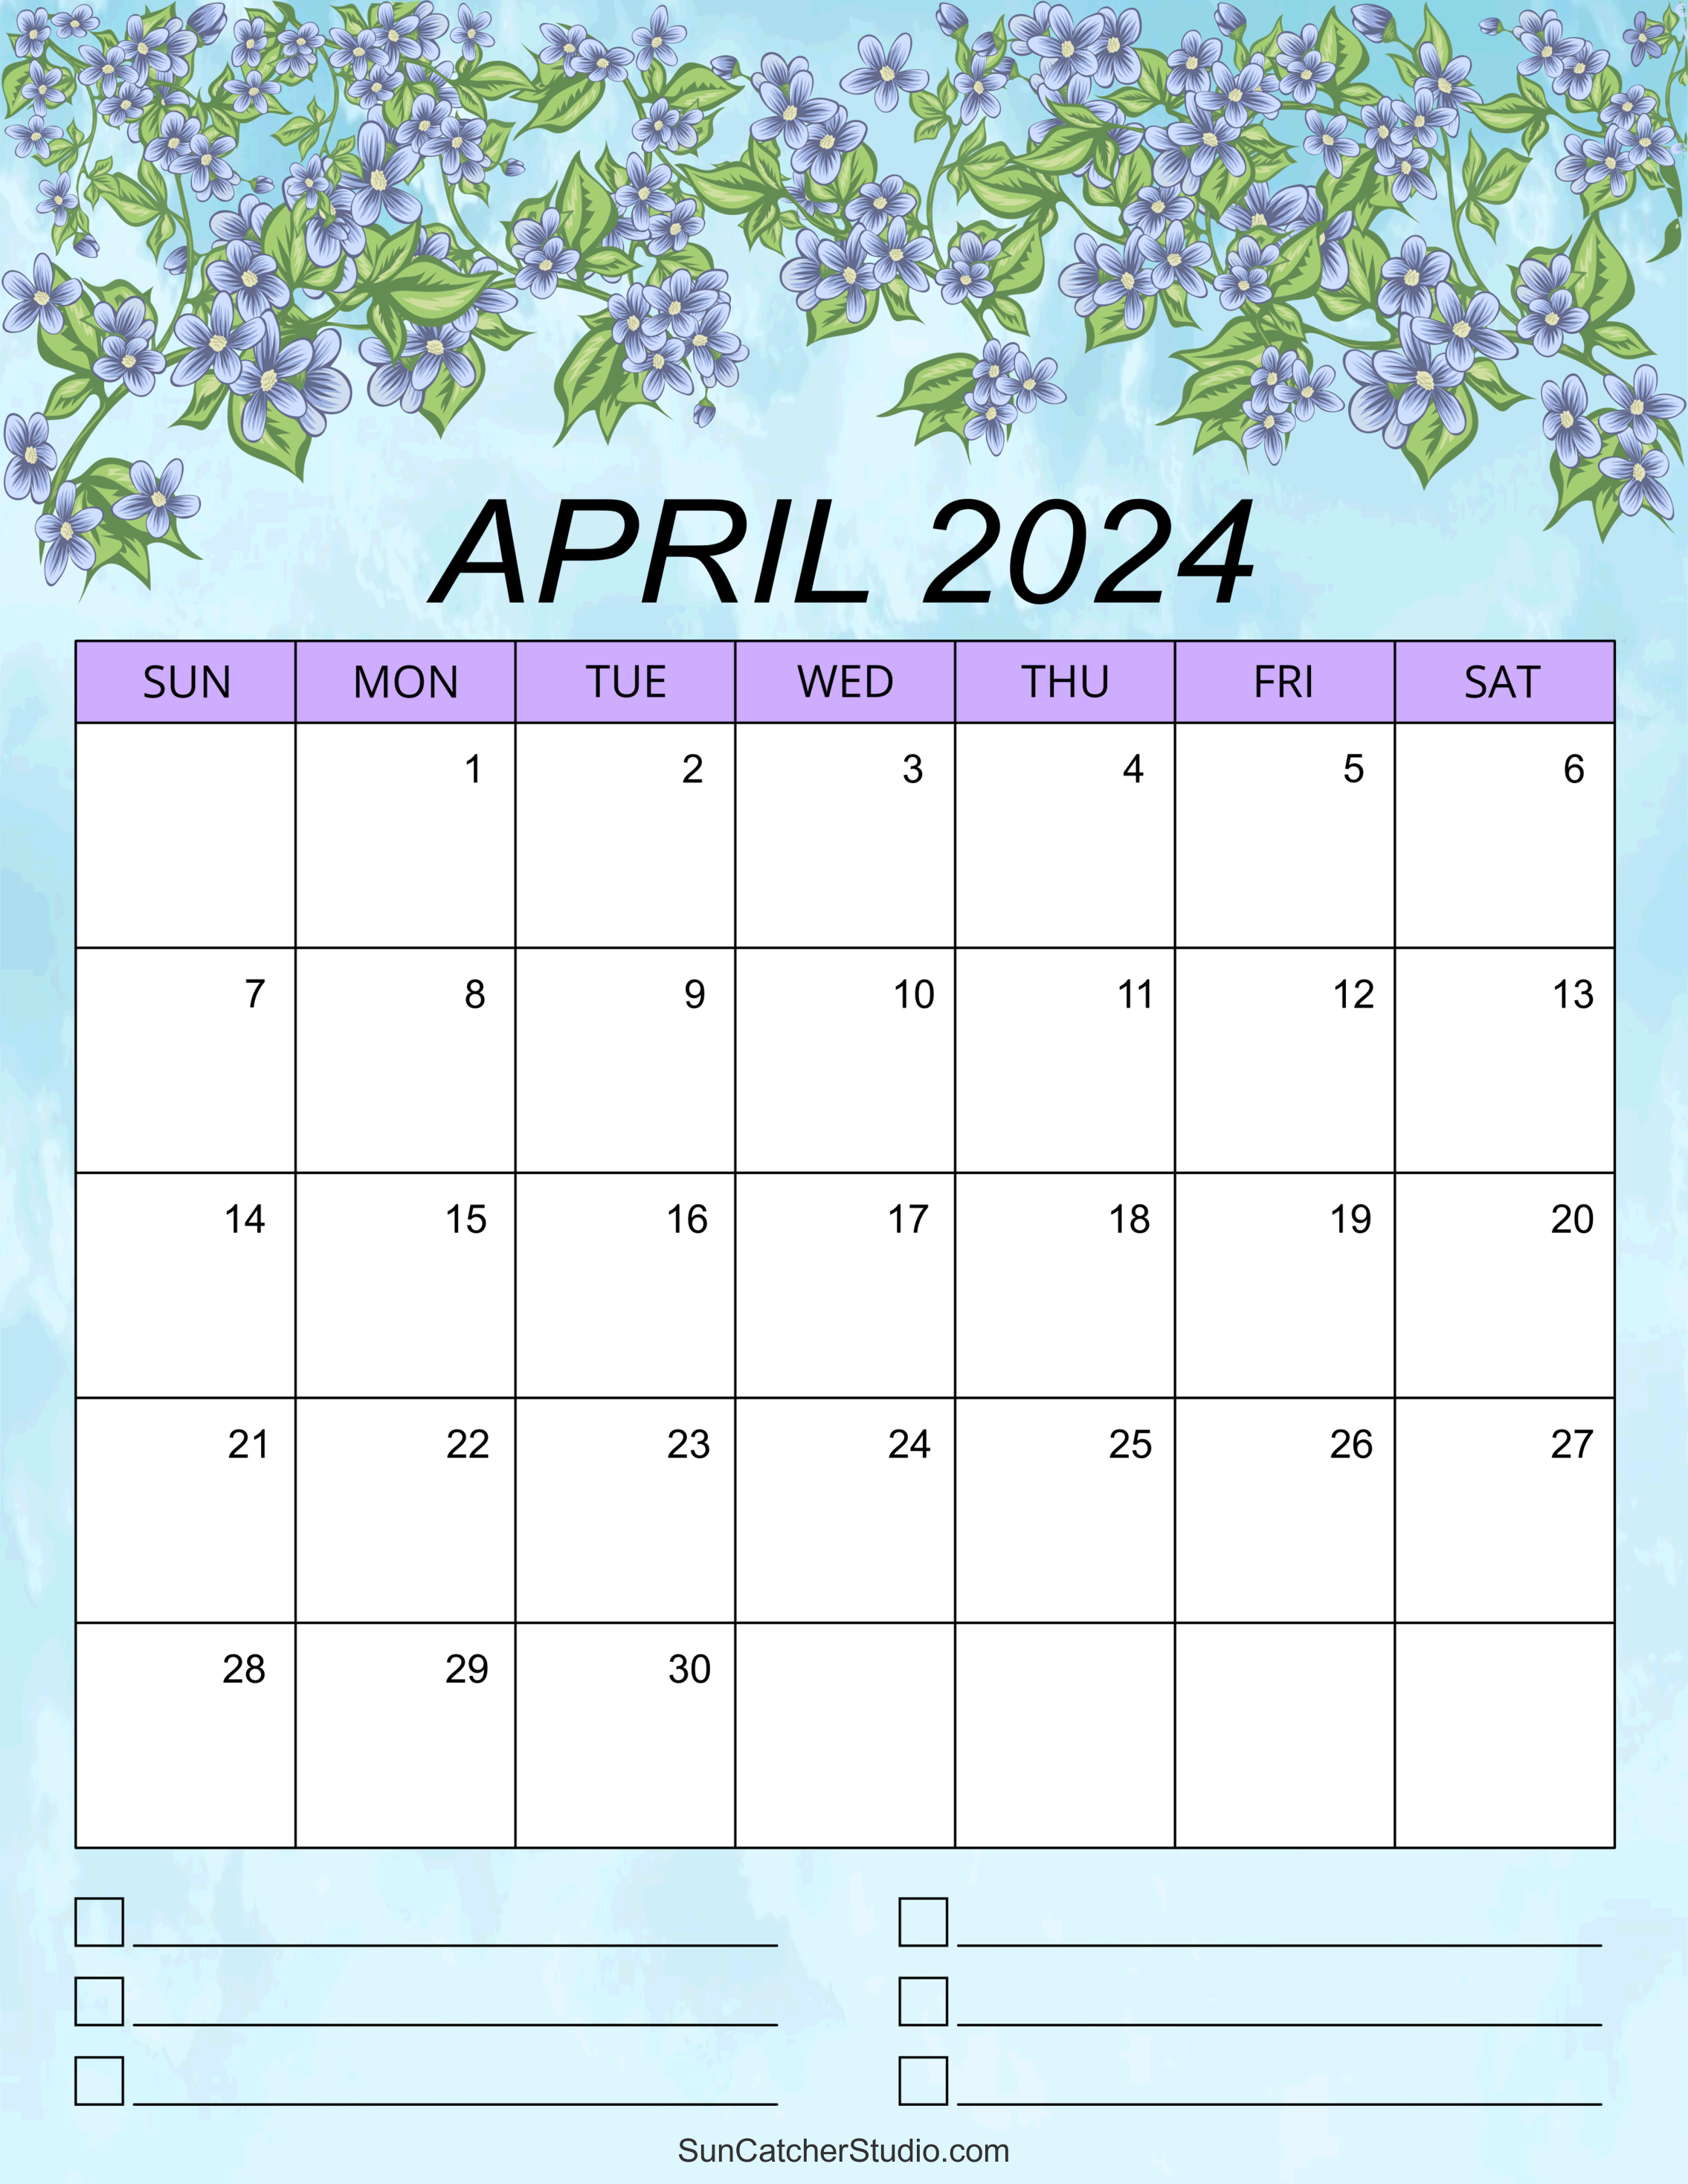 April 2024 Calendar (Free Printable) – Diy Projects, Patterns pertaining to April 2024 Calendar With Notes